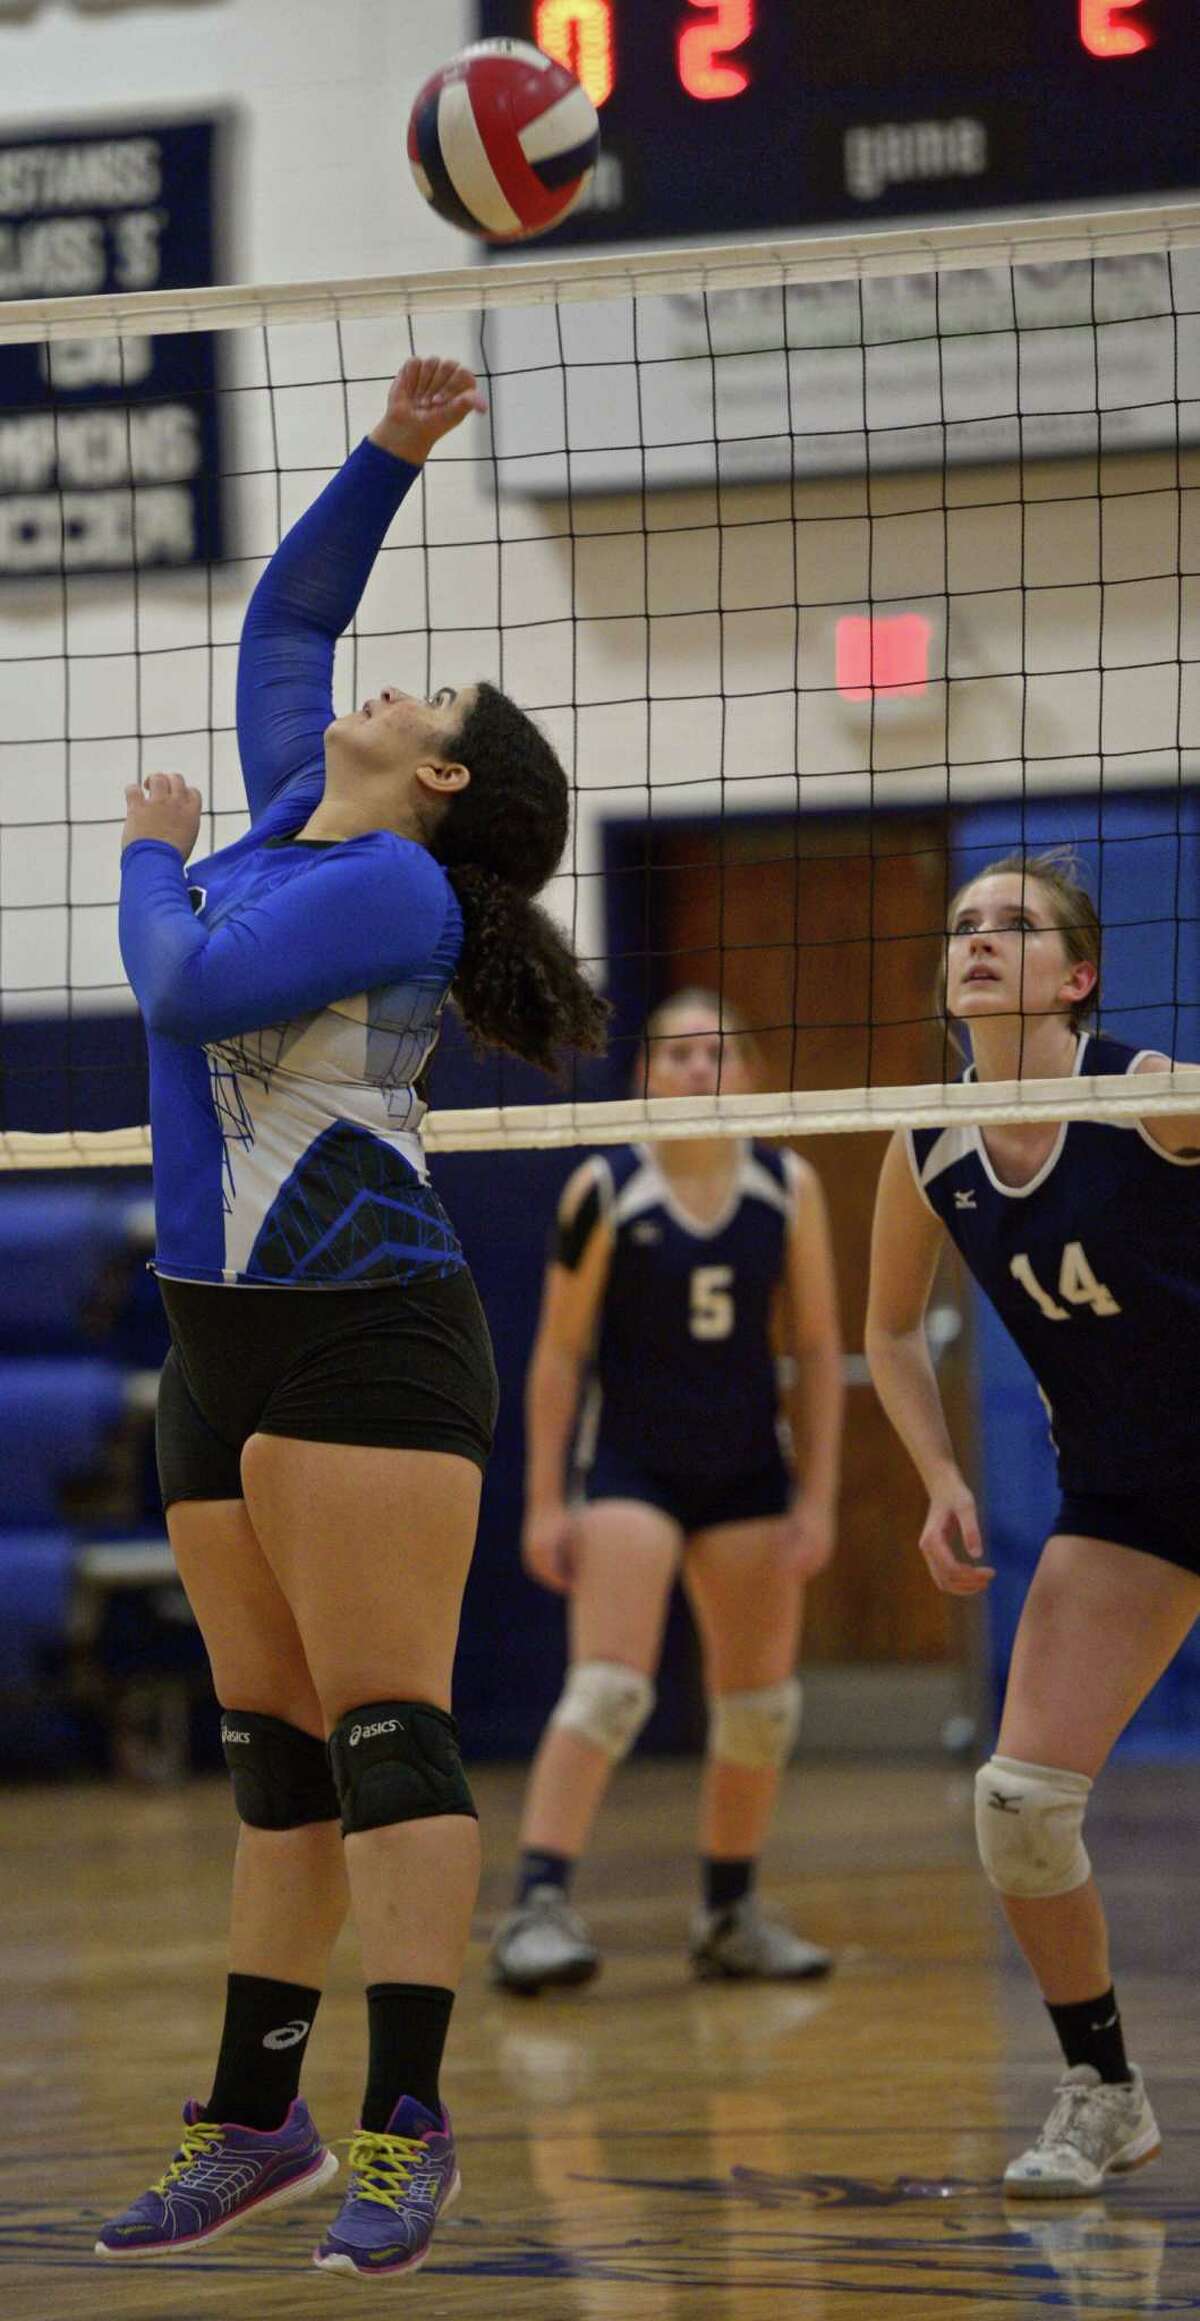 FILE PHOTO: Abbott Tech's Rhayssa Louzada (20) taps the ball over the net while Immaculate's Abby Unz moves in during the girls high school volleyball match between Henry Abbott Technical and Immaculate high school on Wednesday afternoon, September 23, 2015, at Immaculate High School, in Danbury, Conn.